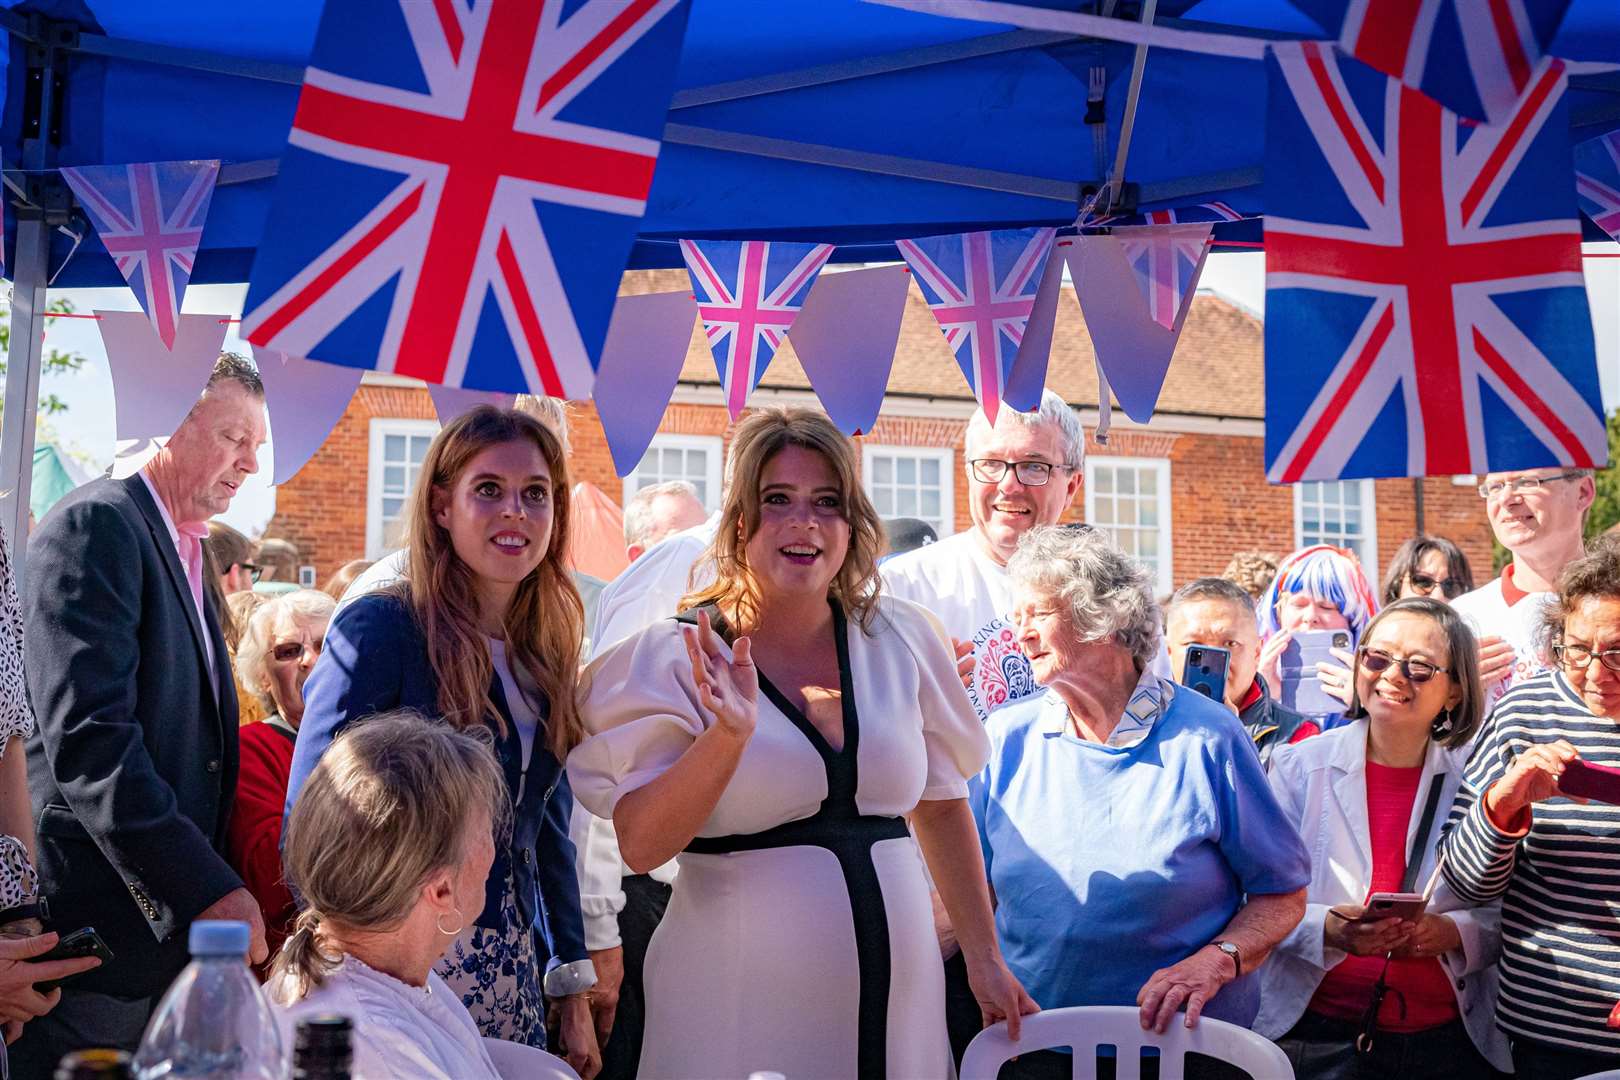 Princess Beatrice (left) and Princess Eugenie (centre) at the Coronation Big Lunch in Chalfont St Giles, Buckinghamshire on May 7 (Ben Birchall/PA)